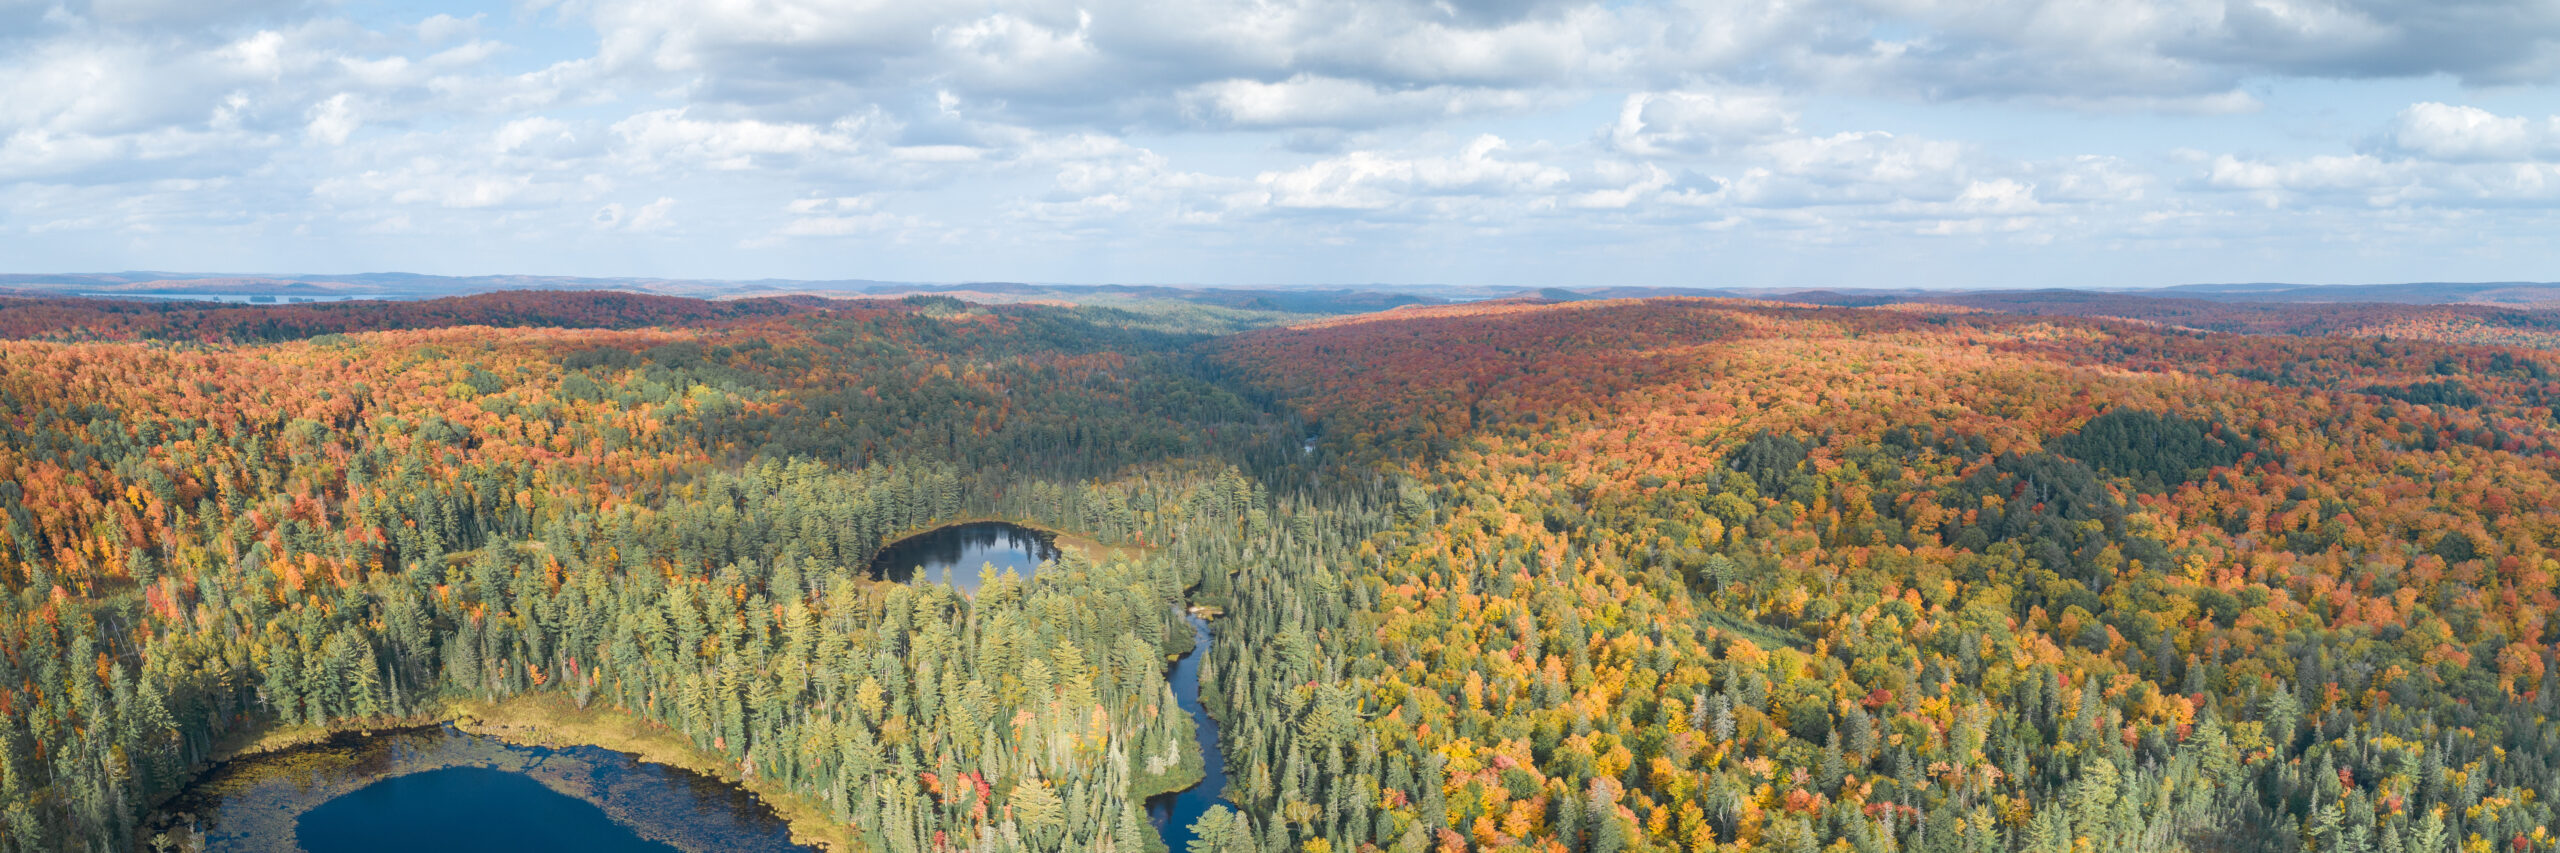 Aerial Of Colorful Autumn Rivers & Lakes Though Mountains In Northern Ontario Canada